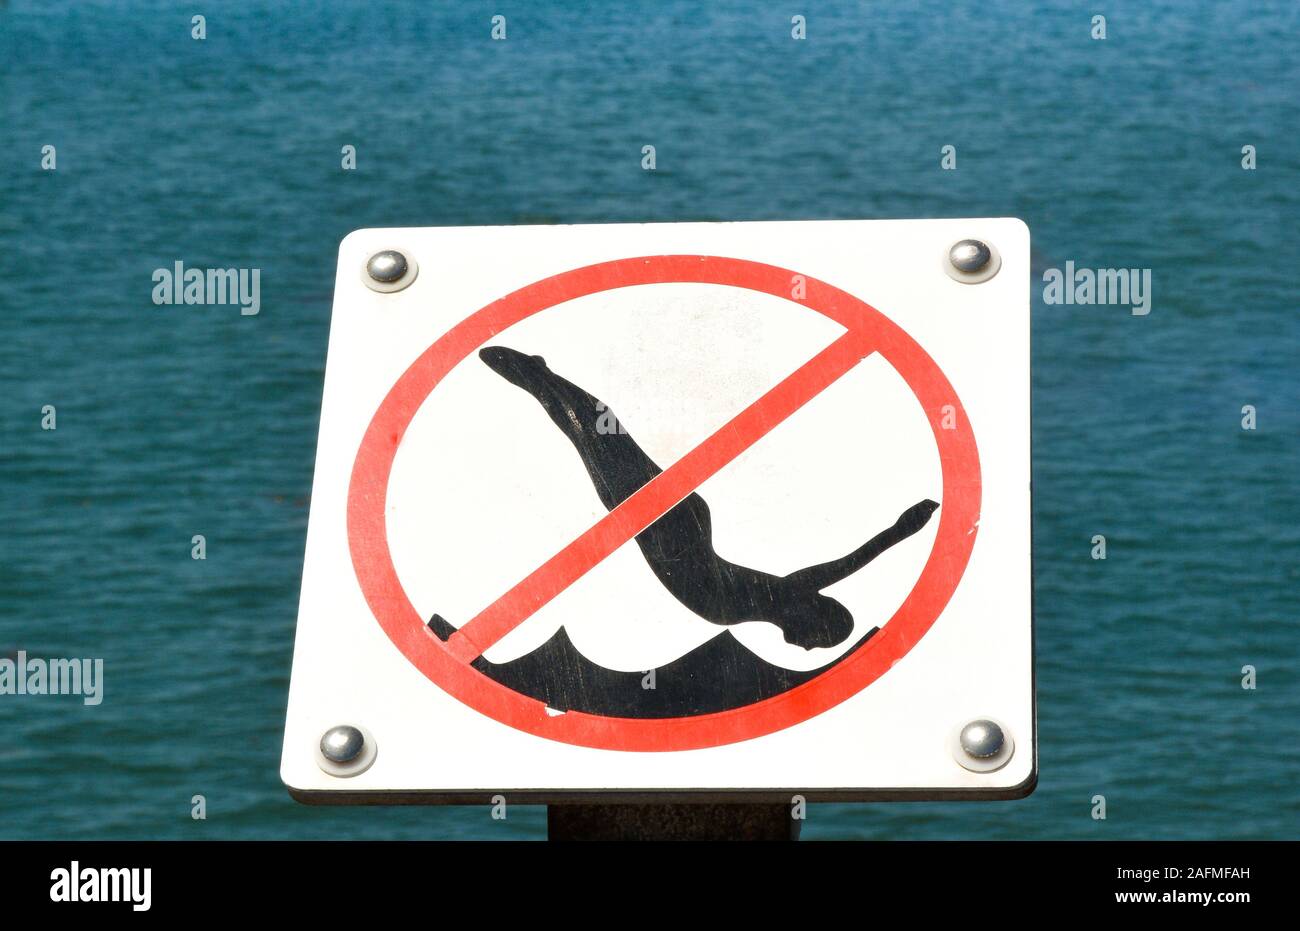 Retro style Graphic clip art type sign prohibiting diving from the pier at Sterns Wharf at the harbor in Santa Barbara, CA, Stock Photo